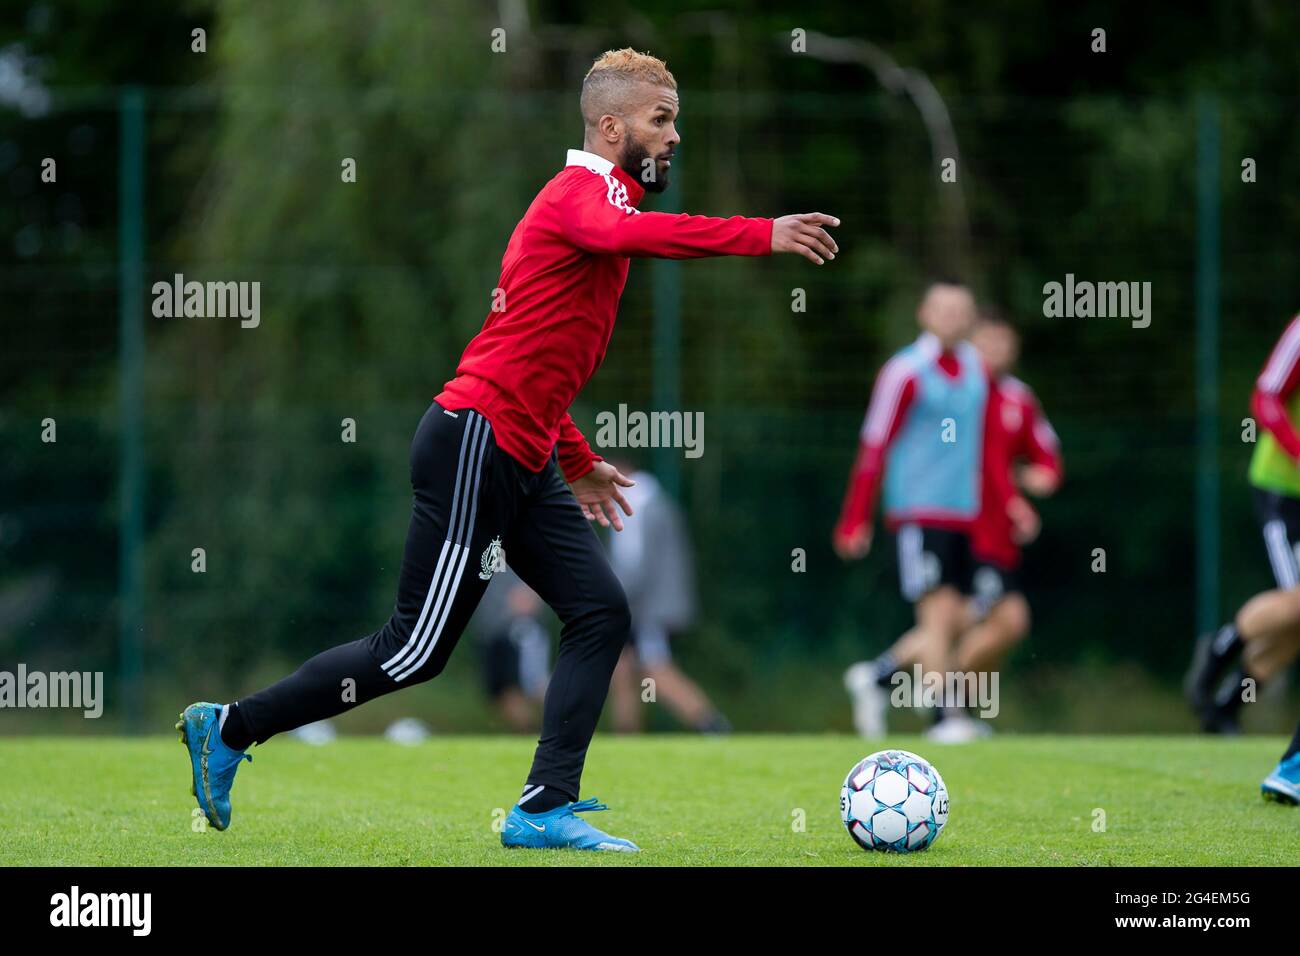 Standard's Mehdi Carcela pictured in action during the first training session for the new season 2021-2022 of Jupiler Pro League first division soccer Stock Photo